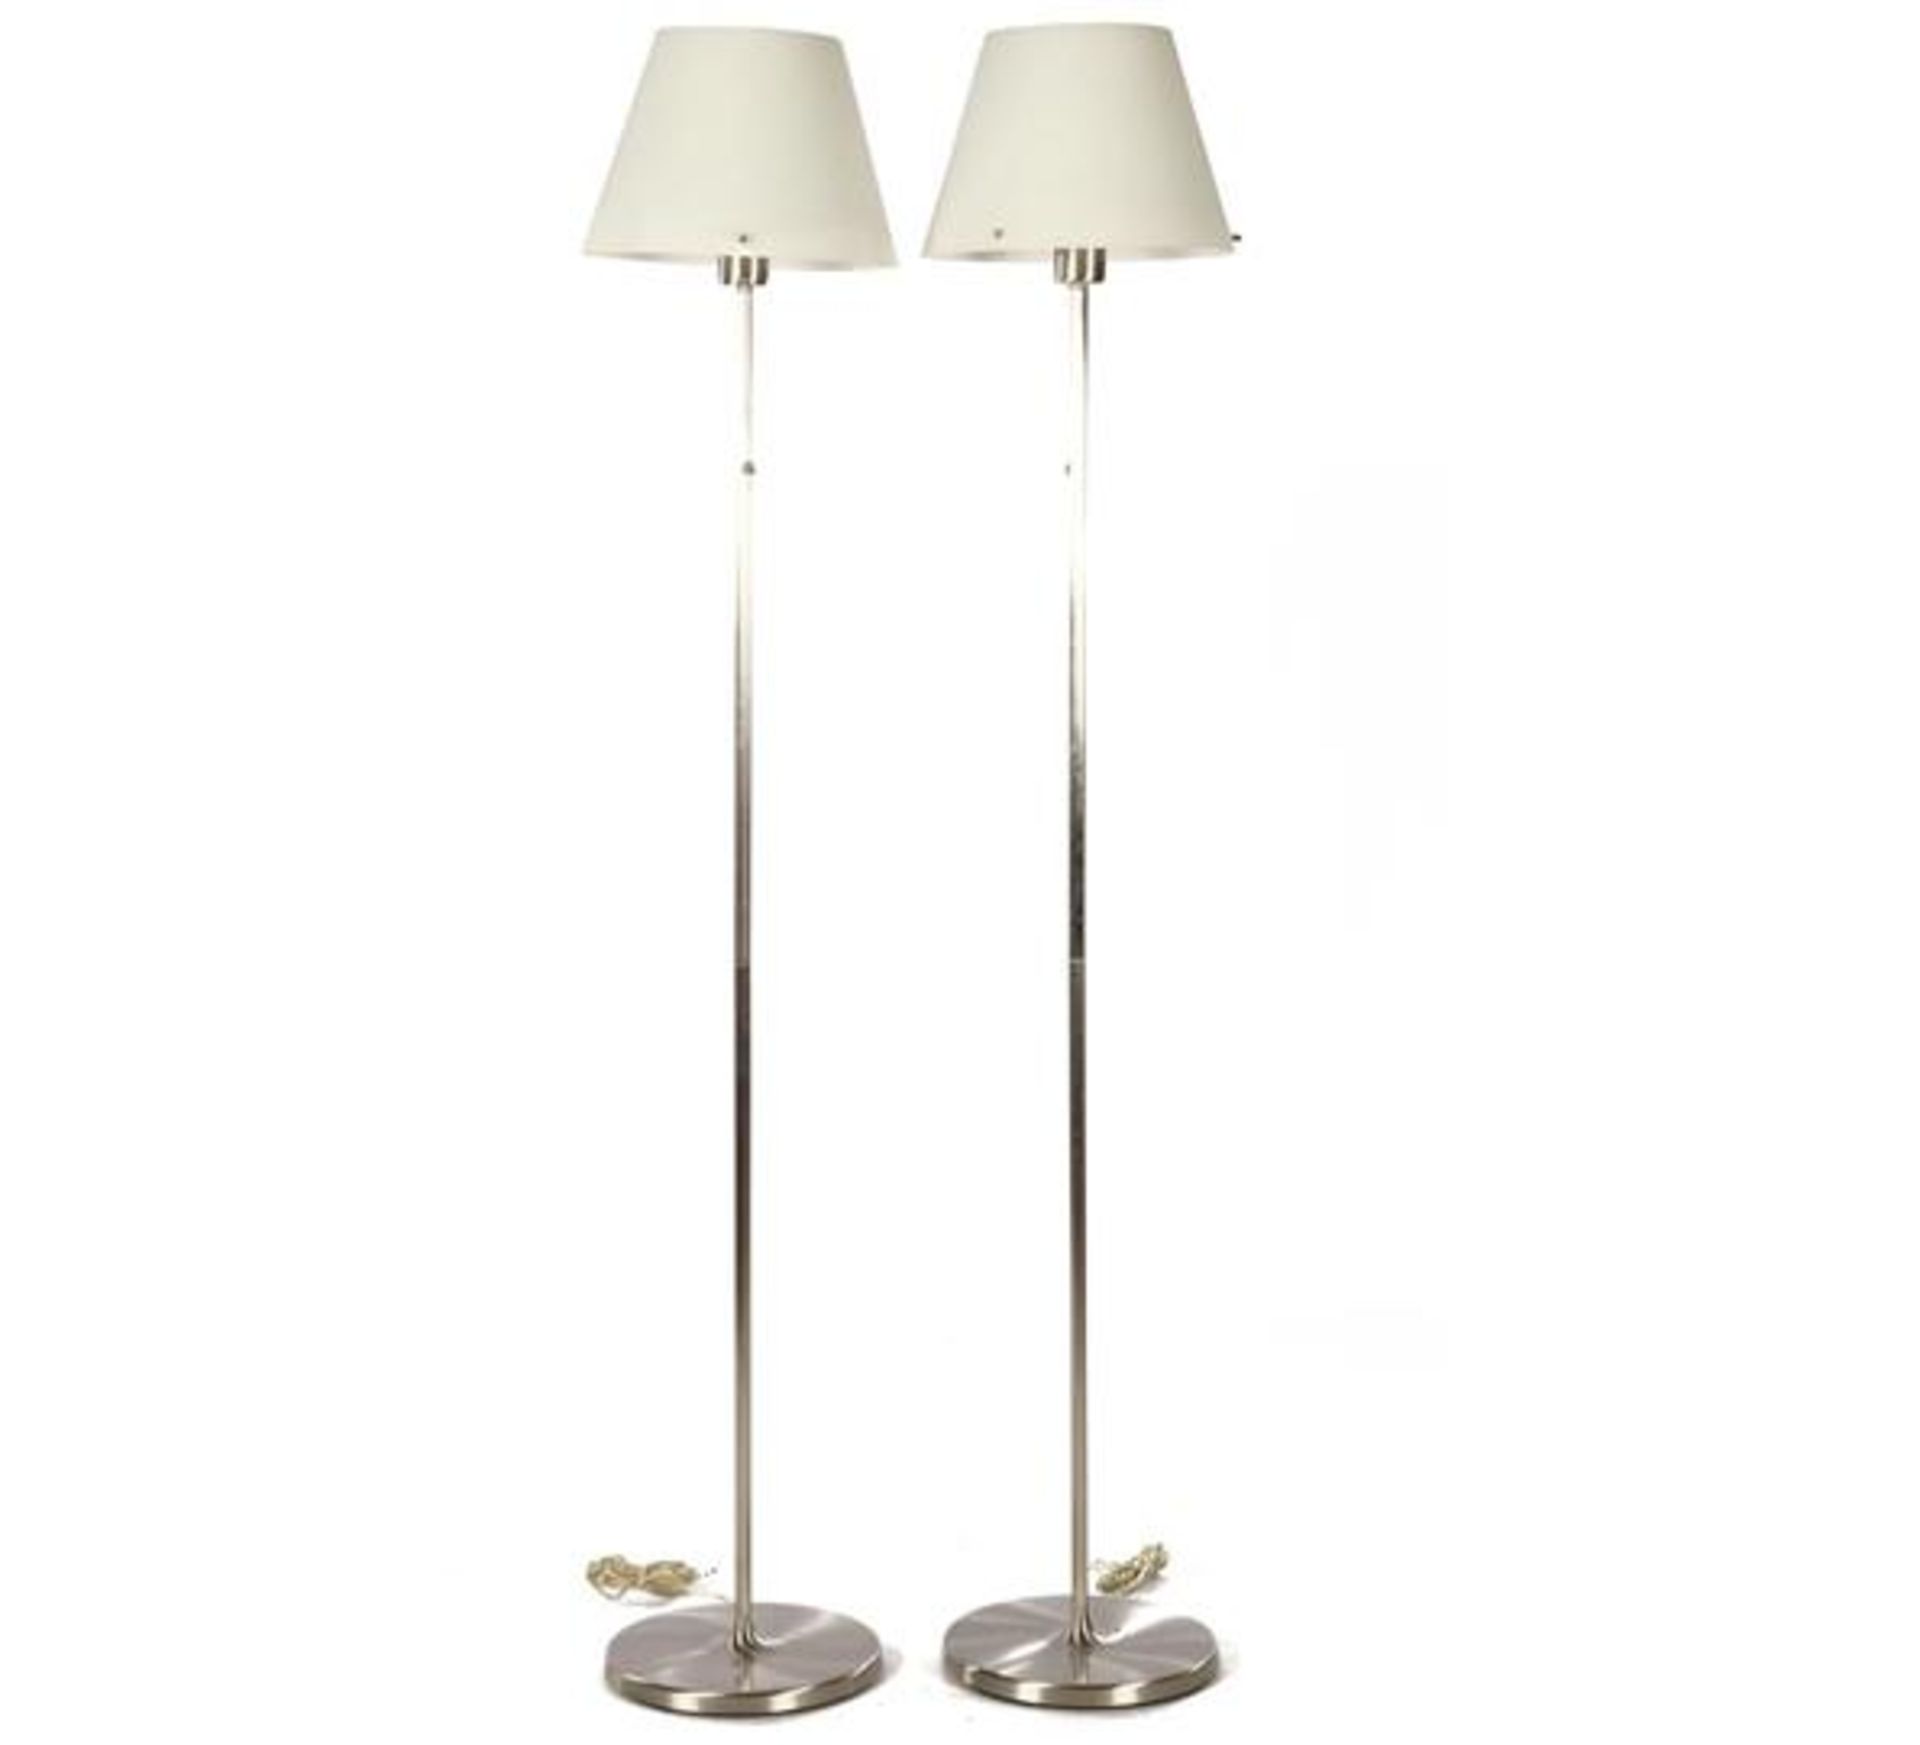 2 Design floor lamps with opaline glass shades, 160 cm high